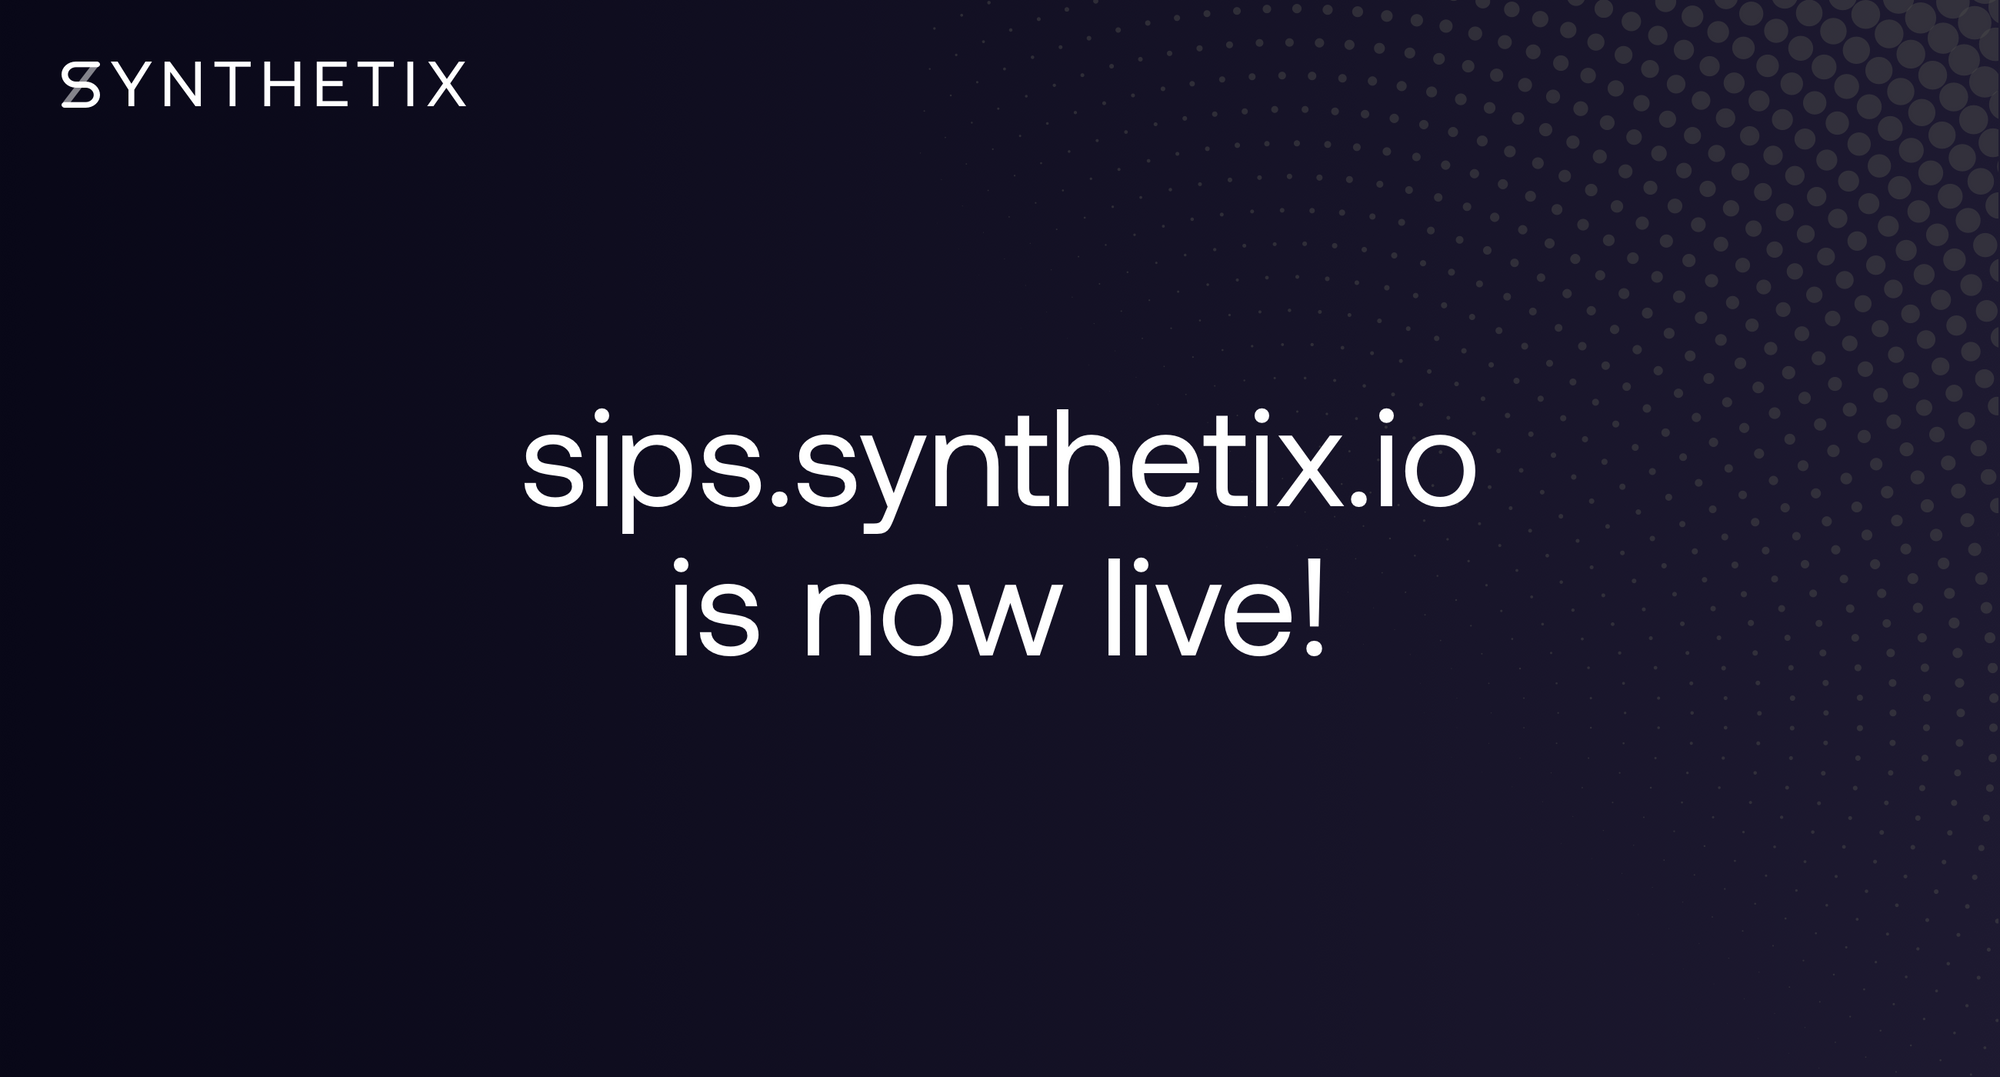 Our new SIPs website is now live!